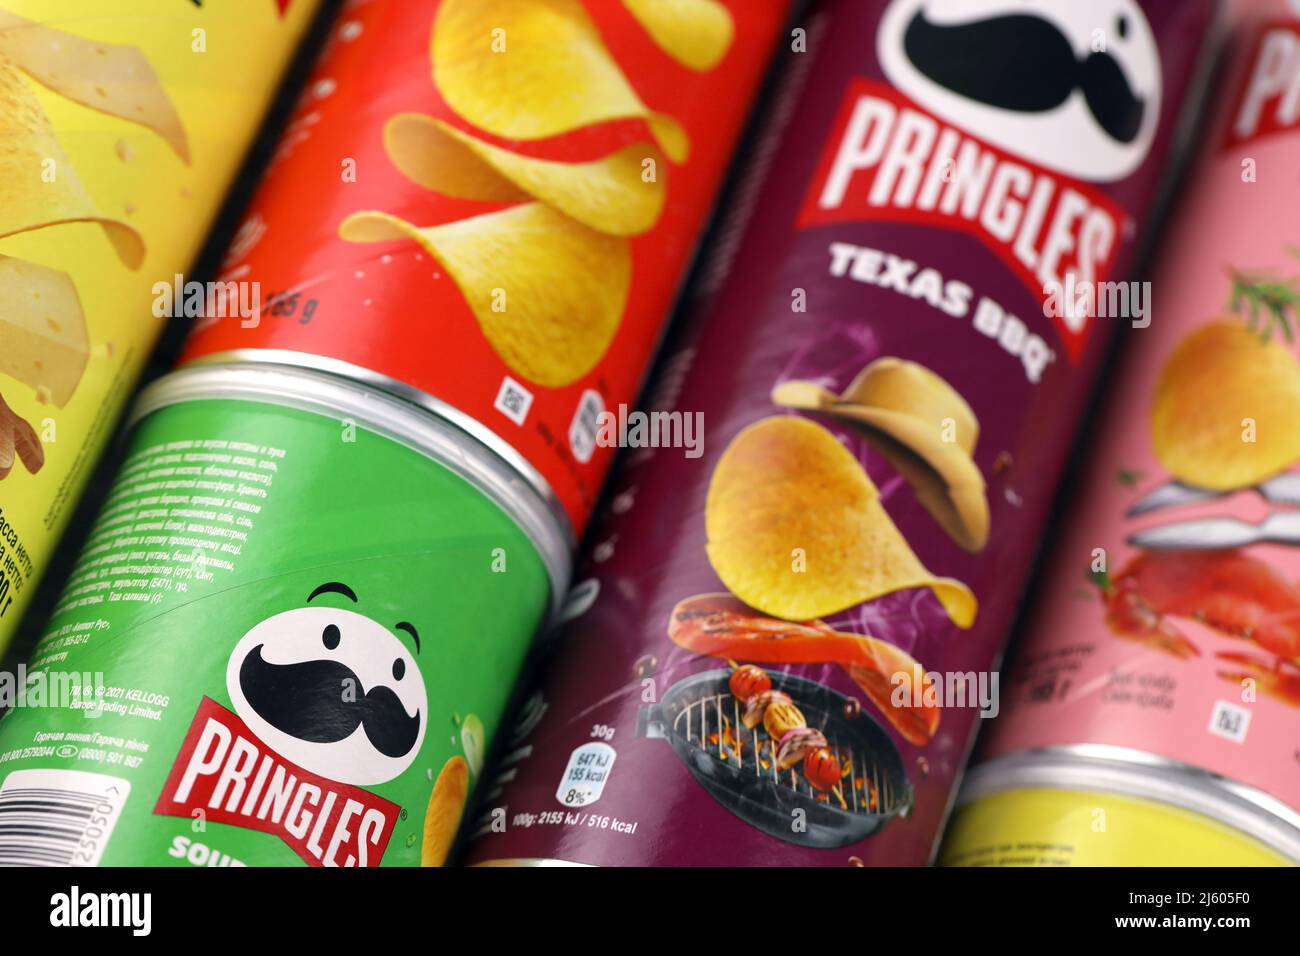 KHARKIV, UKRAINE - DECEMBER 16, 2021: Pringles production with new logo. Pringles is a brand of potato snack chips owned by the Kellogg Company Stock Photo